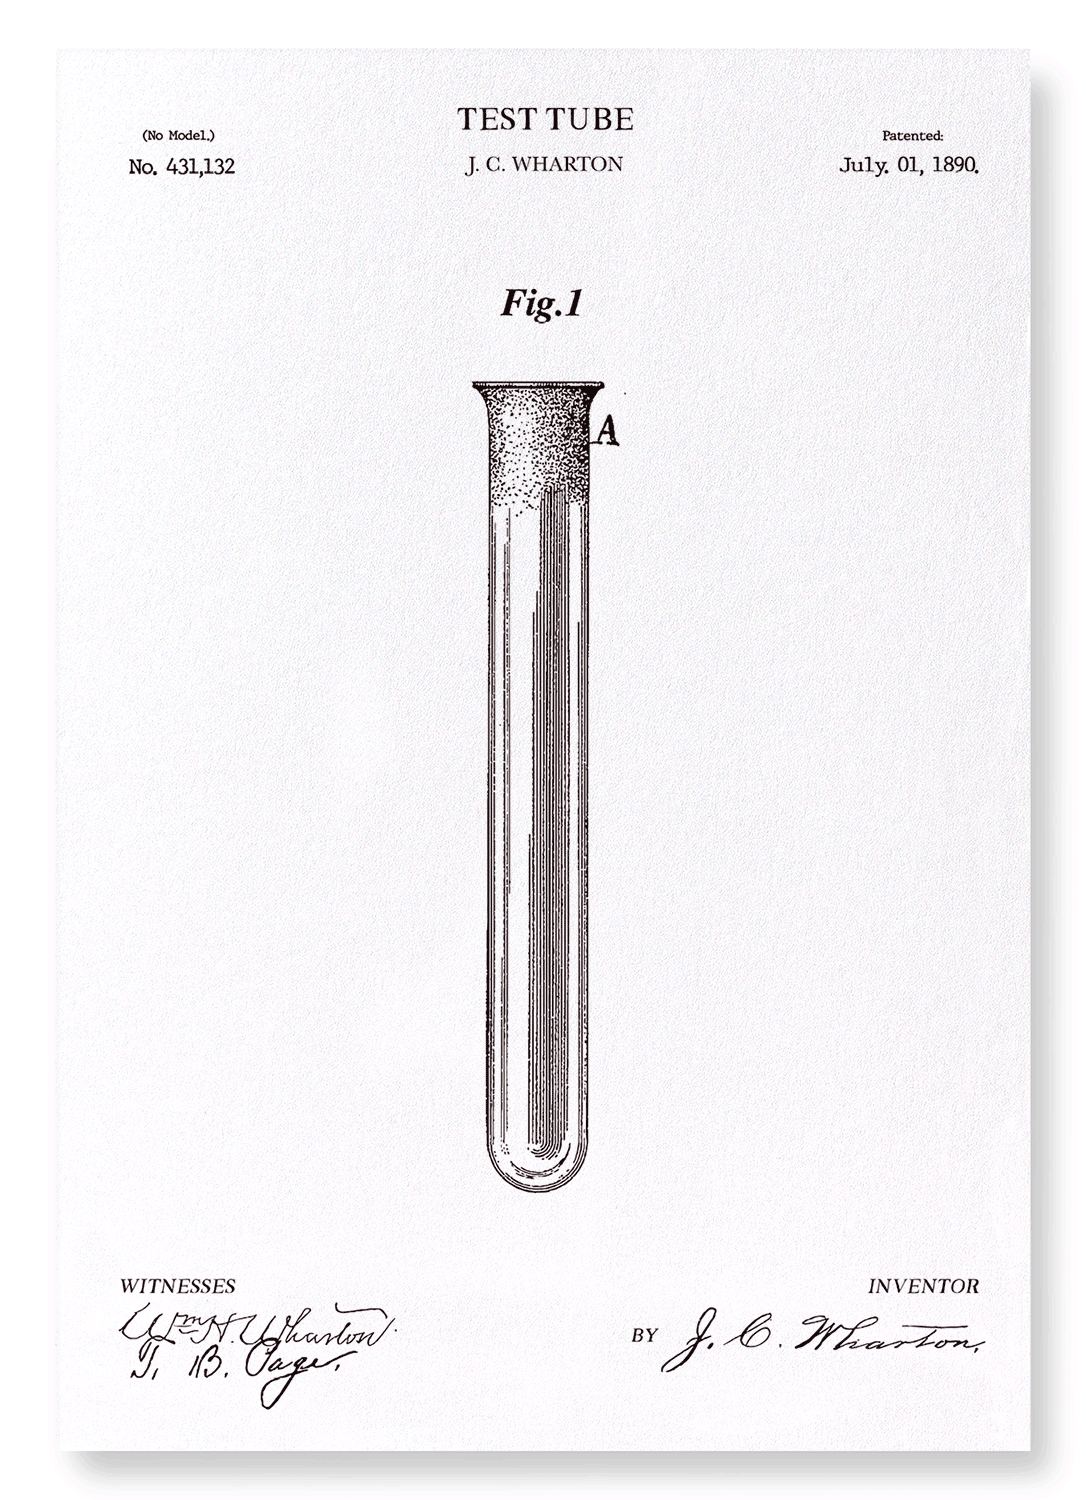 PATENT OF TEST TUBE (1890)